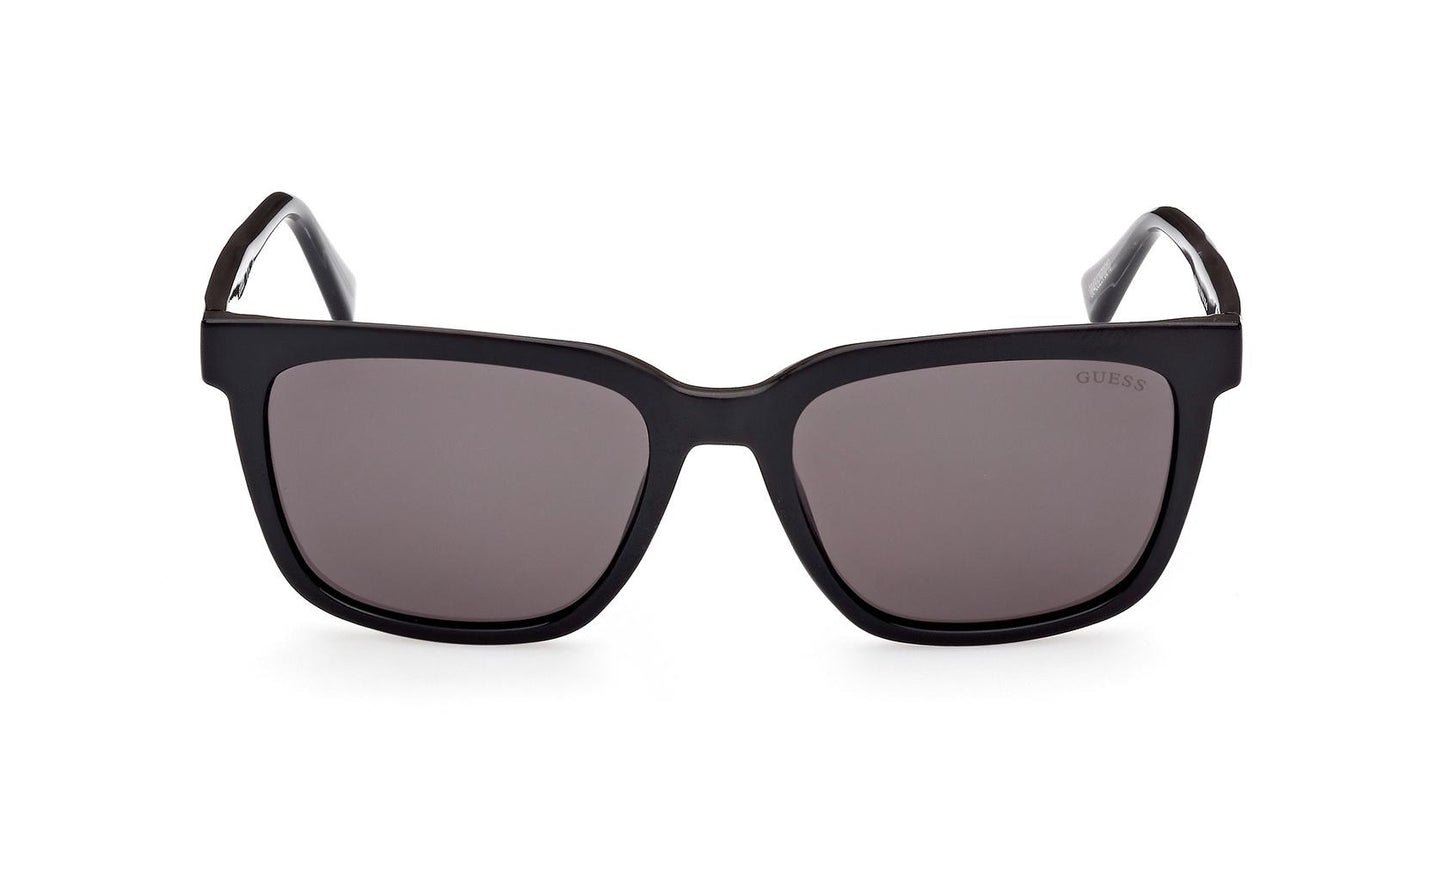 Load image into Gallery viewer, Guess Sunglasses GU00050 01A
